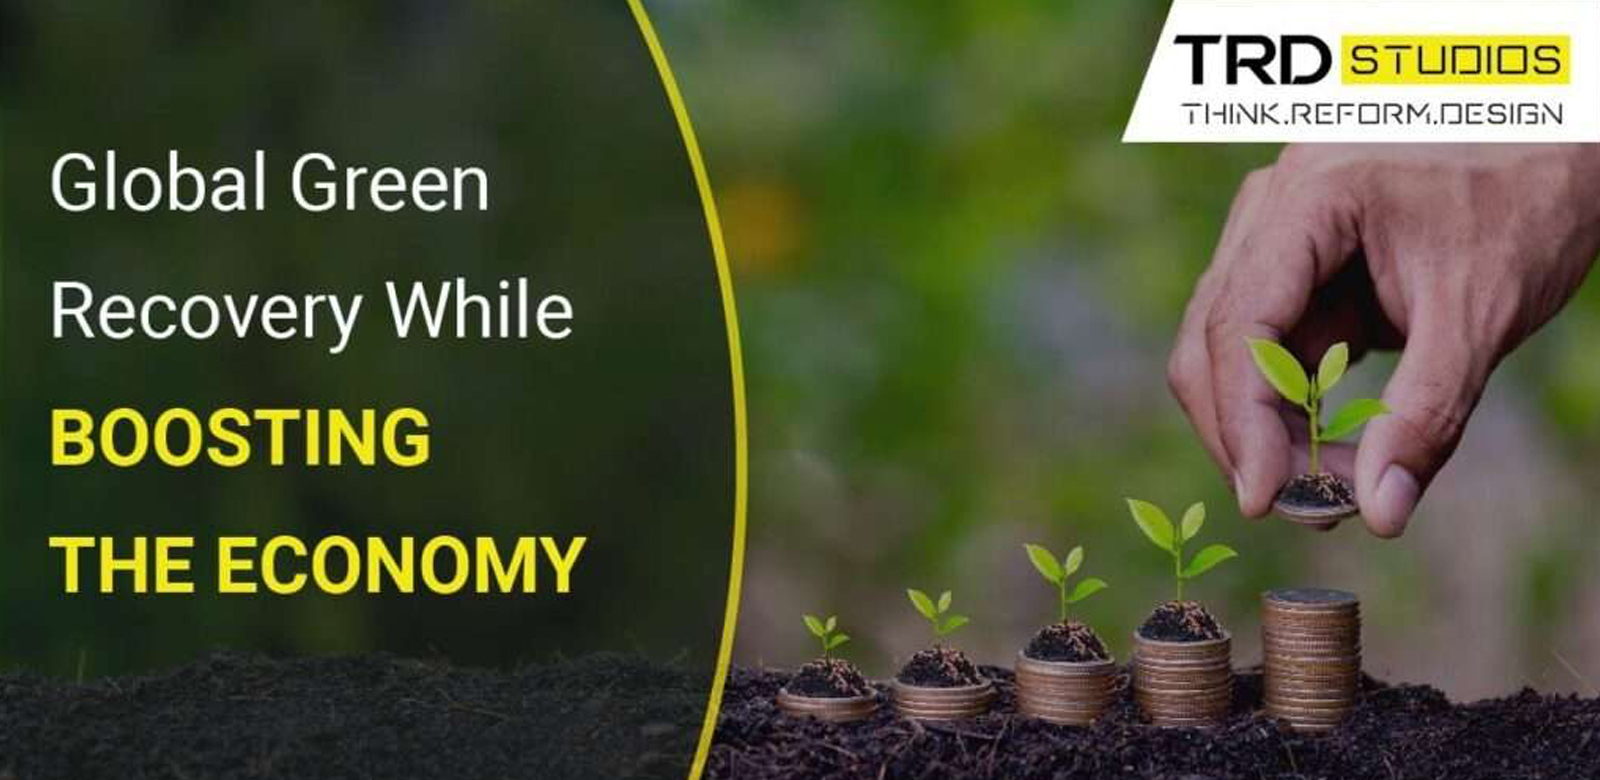 Global green recovery while boosting the economy